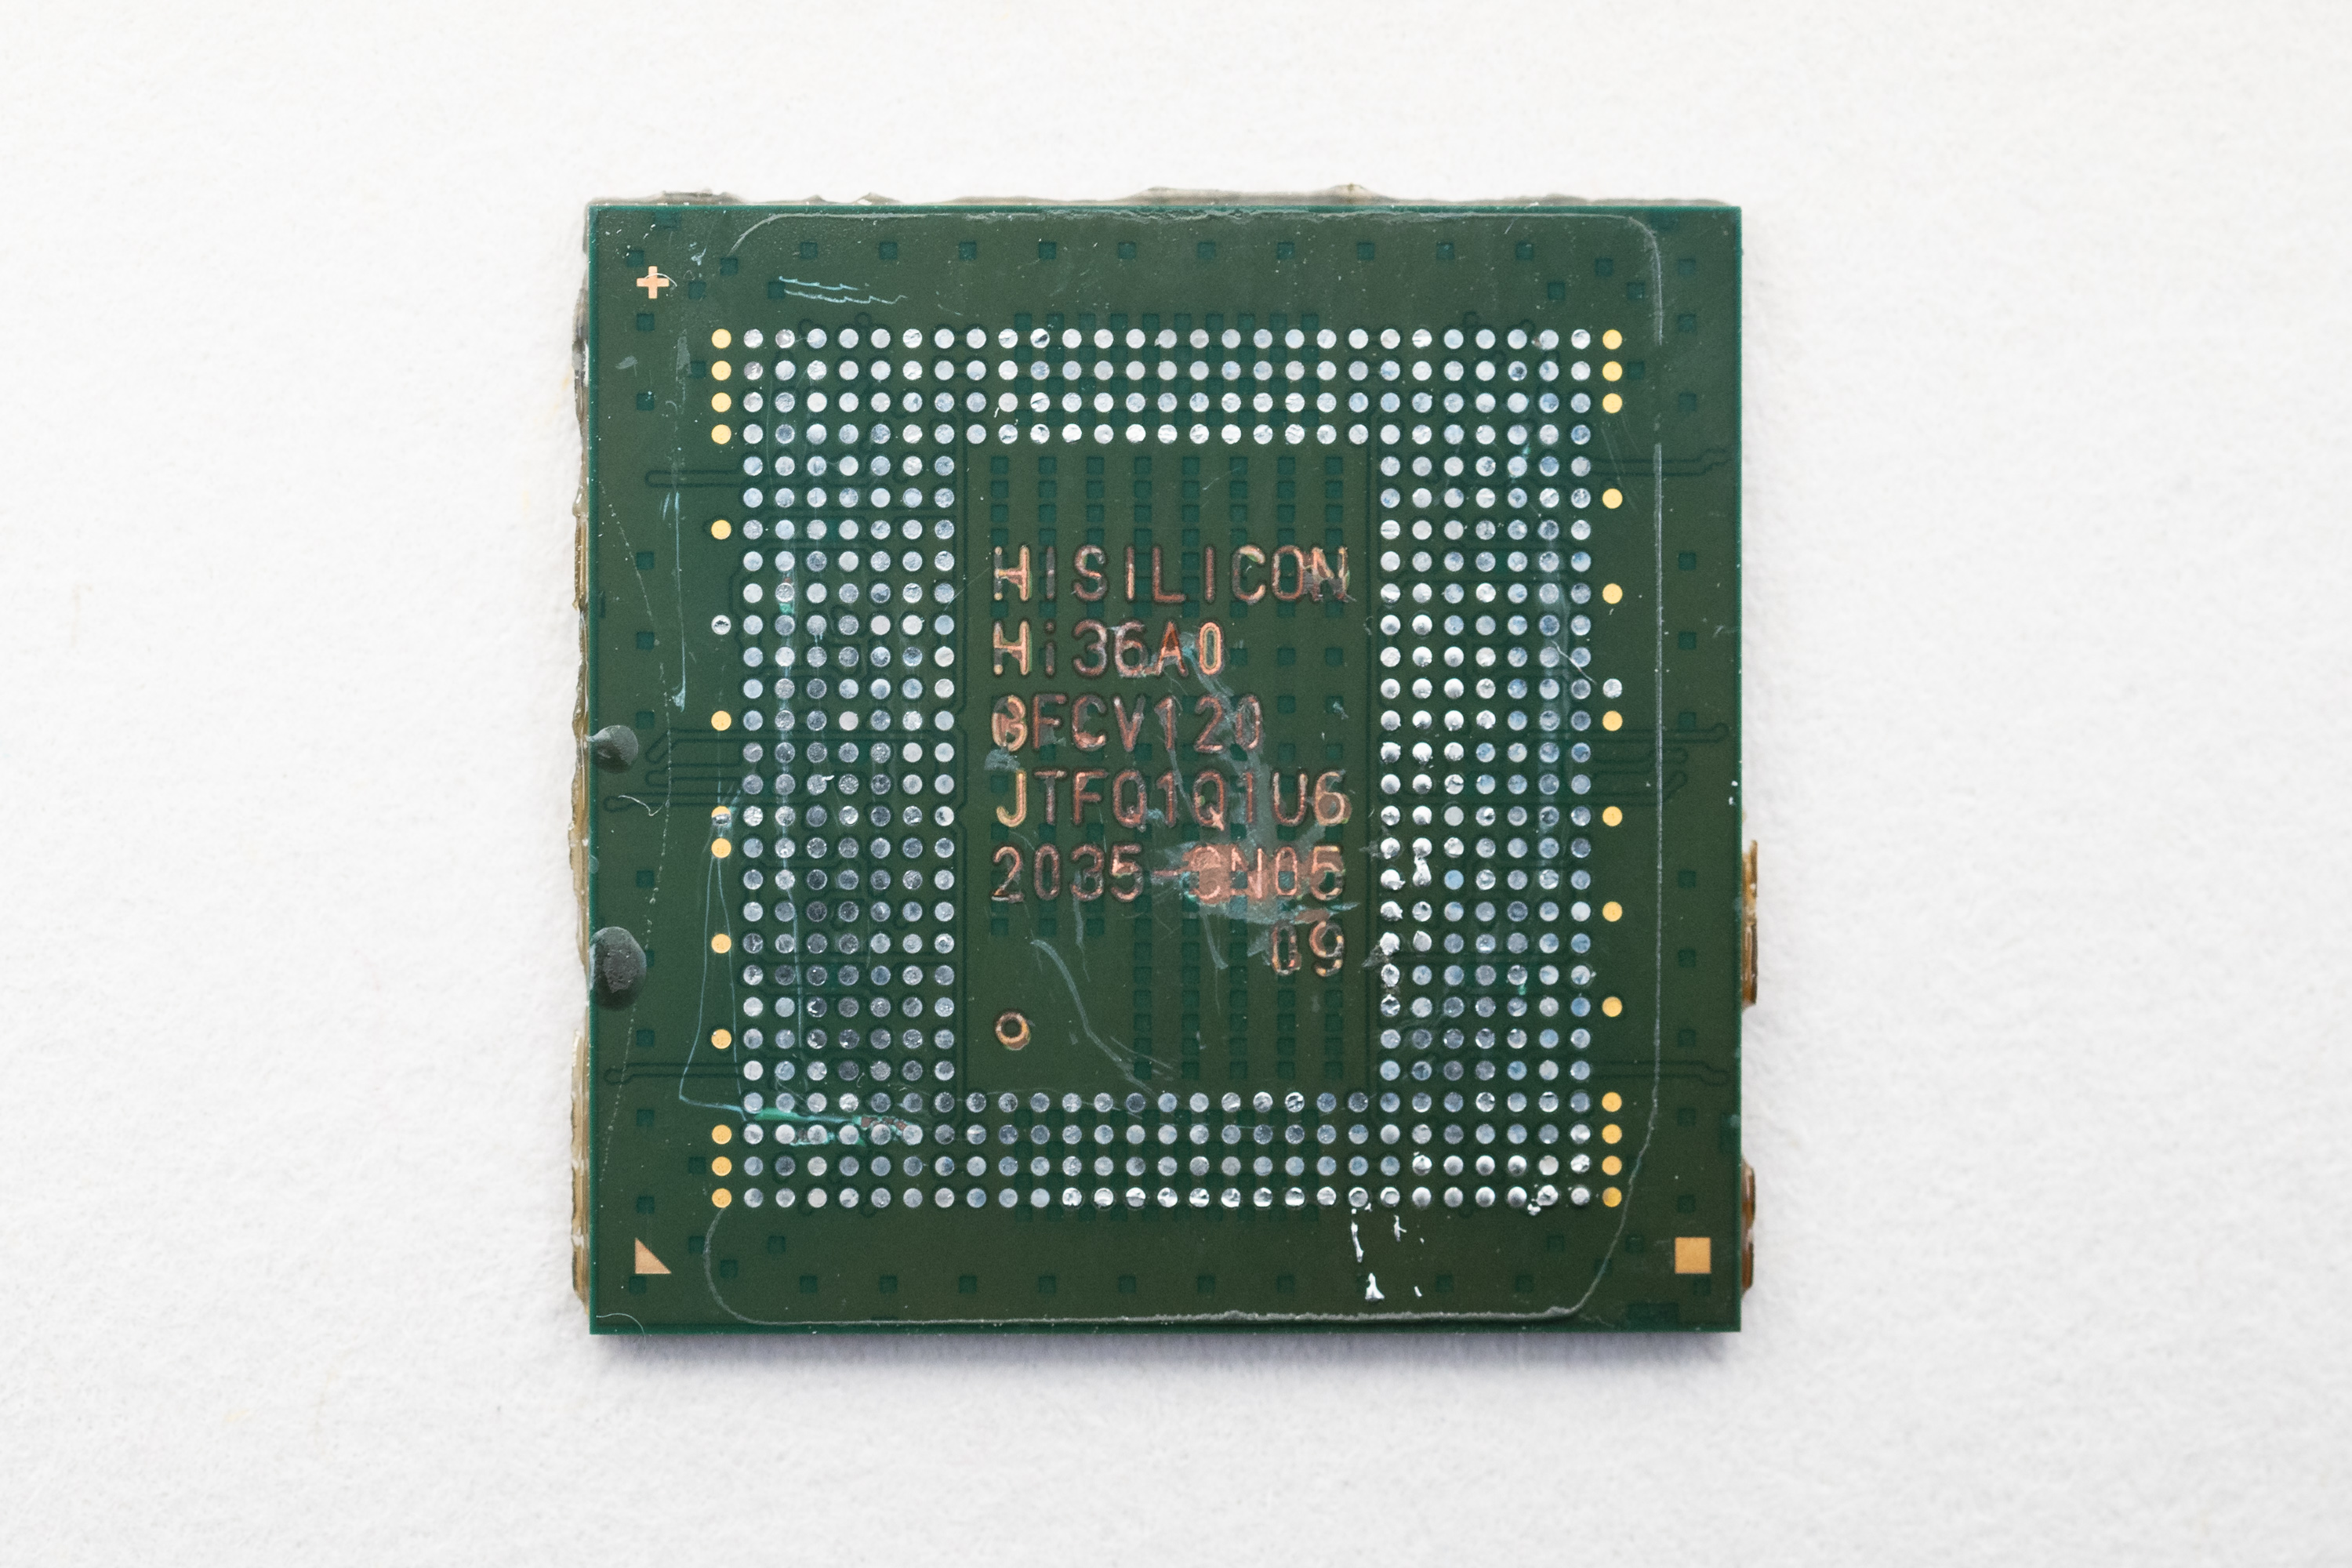 A Kirin 9000s chip fabricated in China by Semiconductor Manufacturing International Corp.